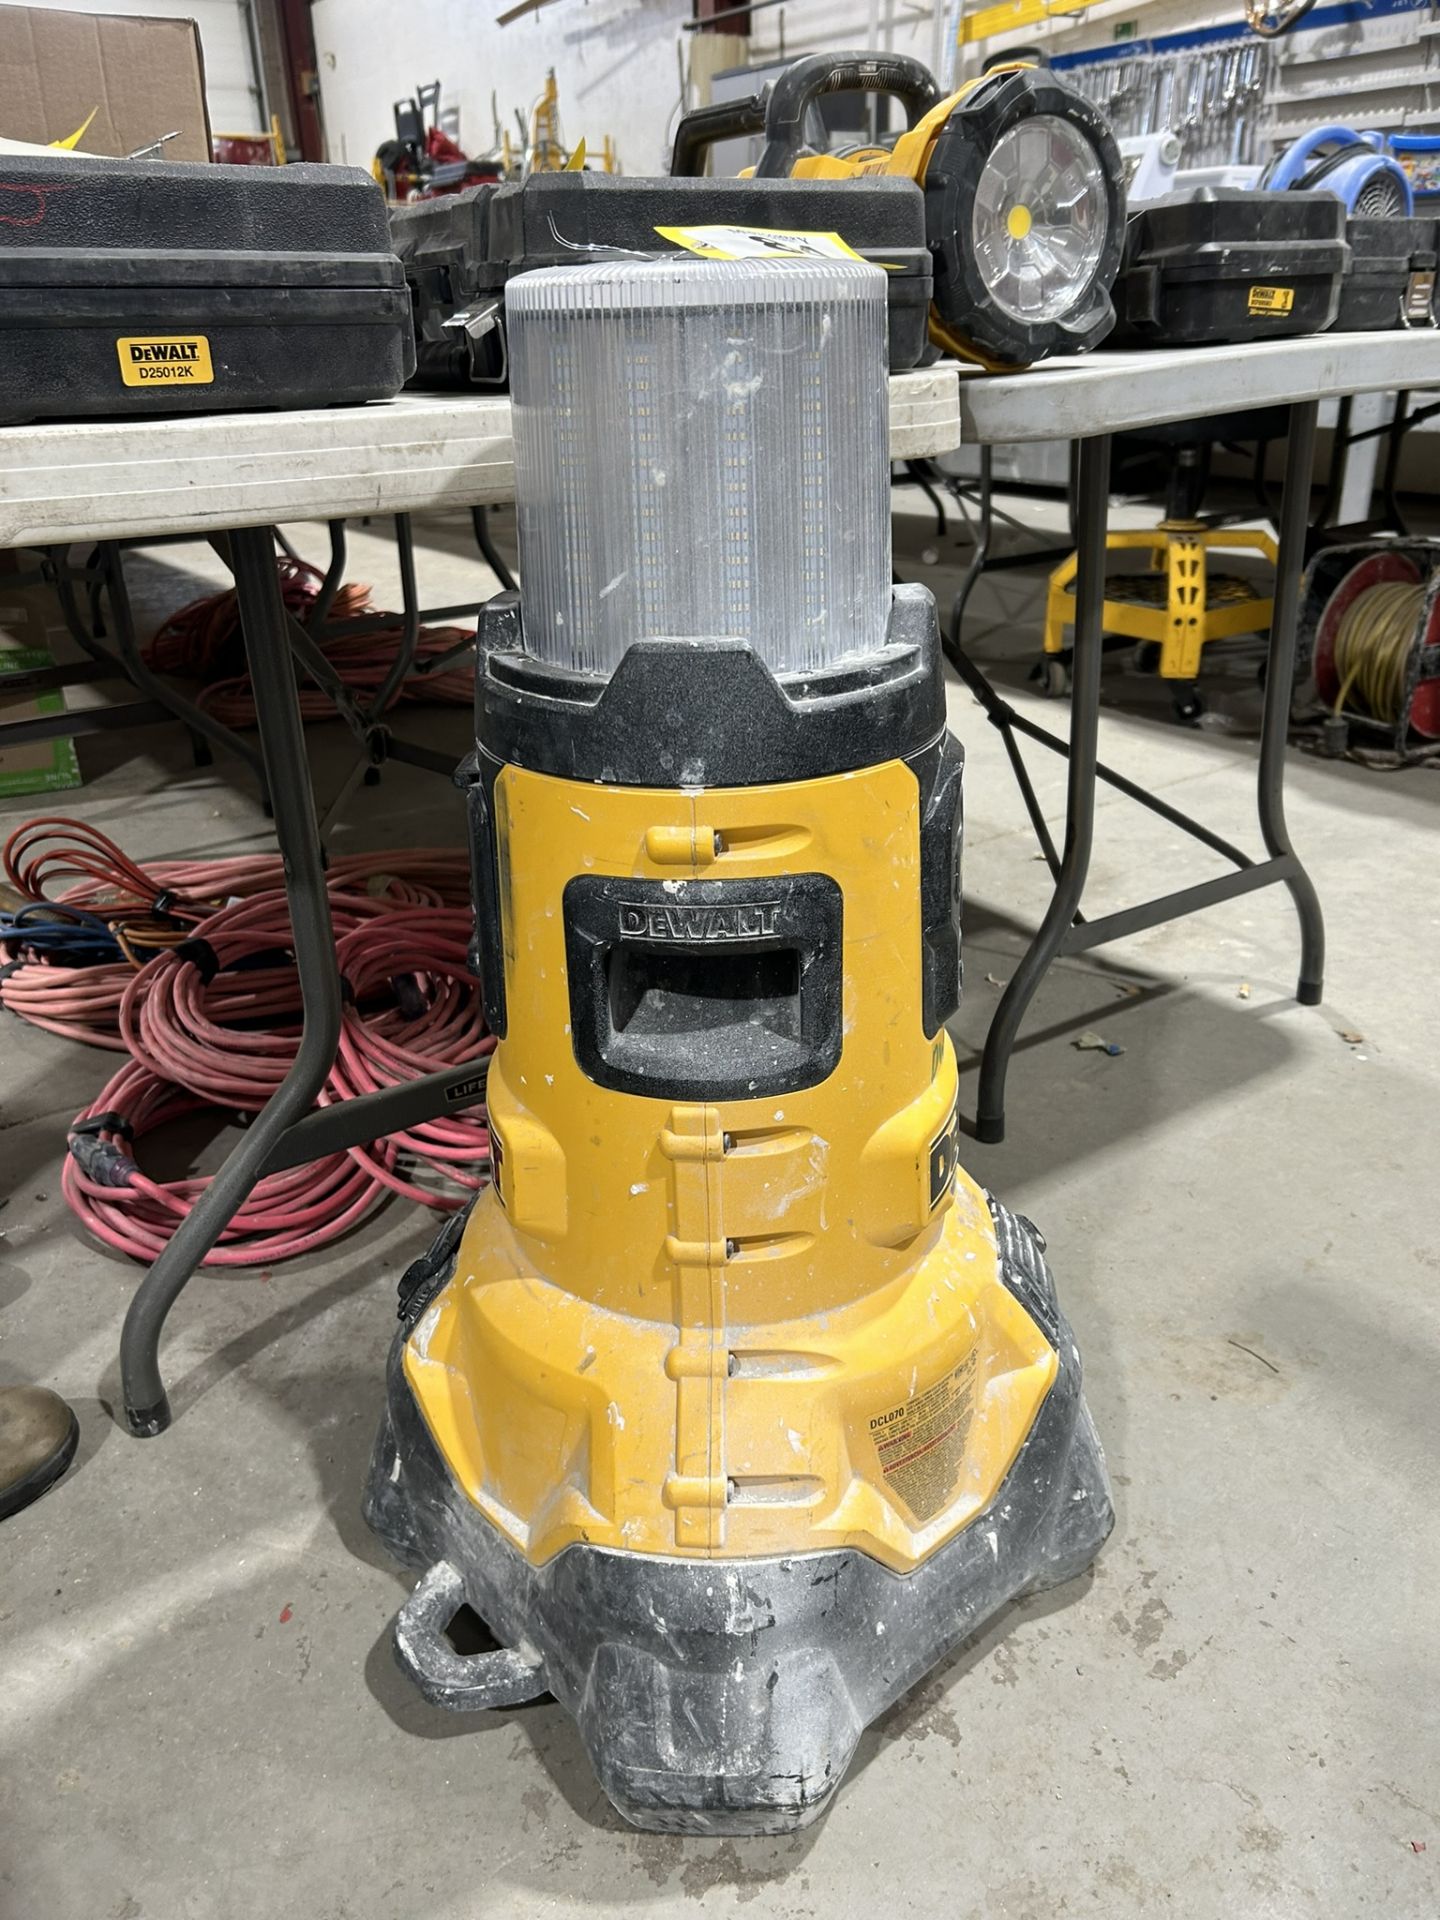 DEWALT DCL070 ELEC./CORDLESS BLUETOOTH LARGE AREA LED LIGHT W/ BUILT IN BATTERY CHARGER - Image 2 of 4